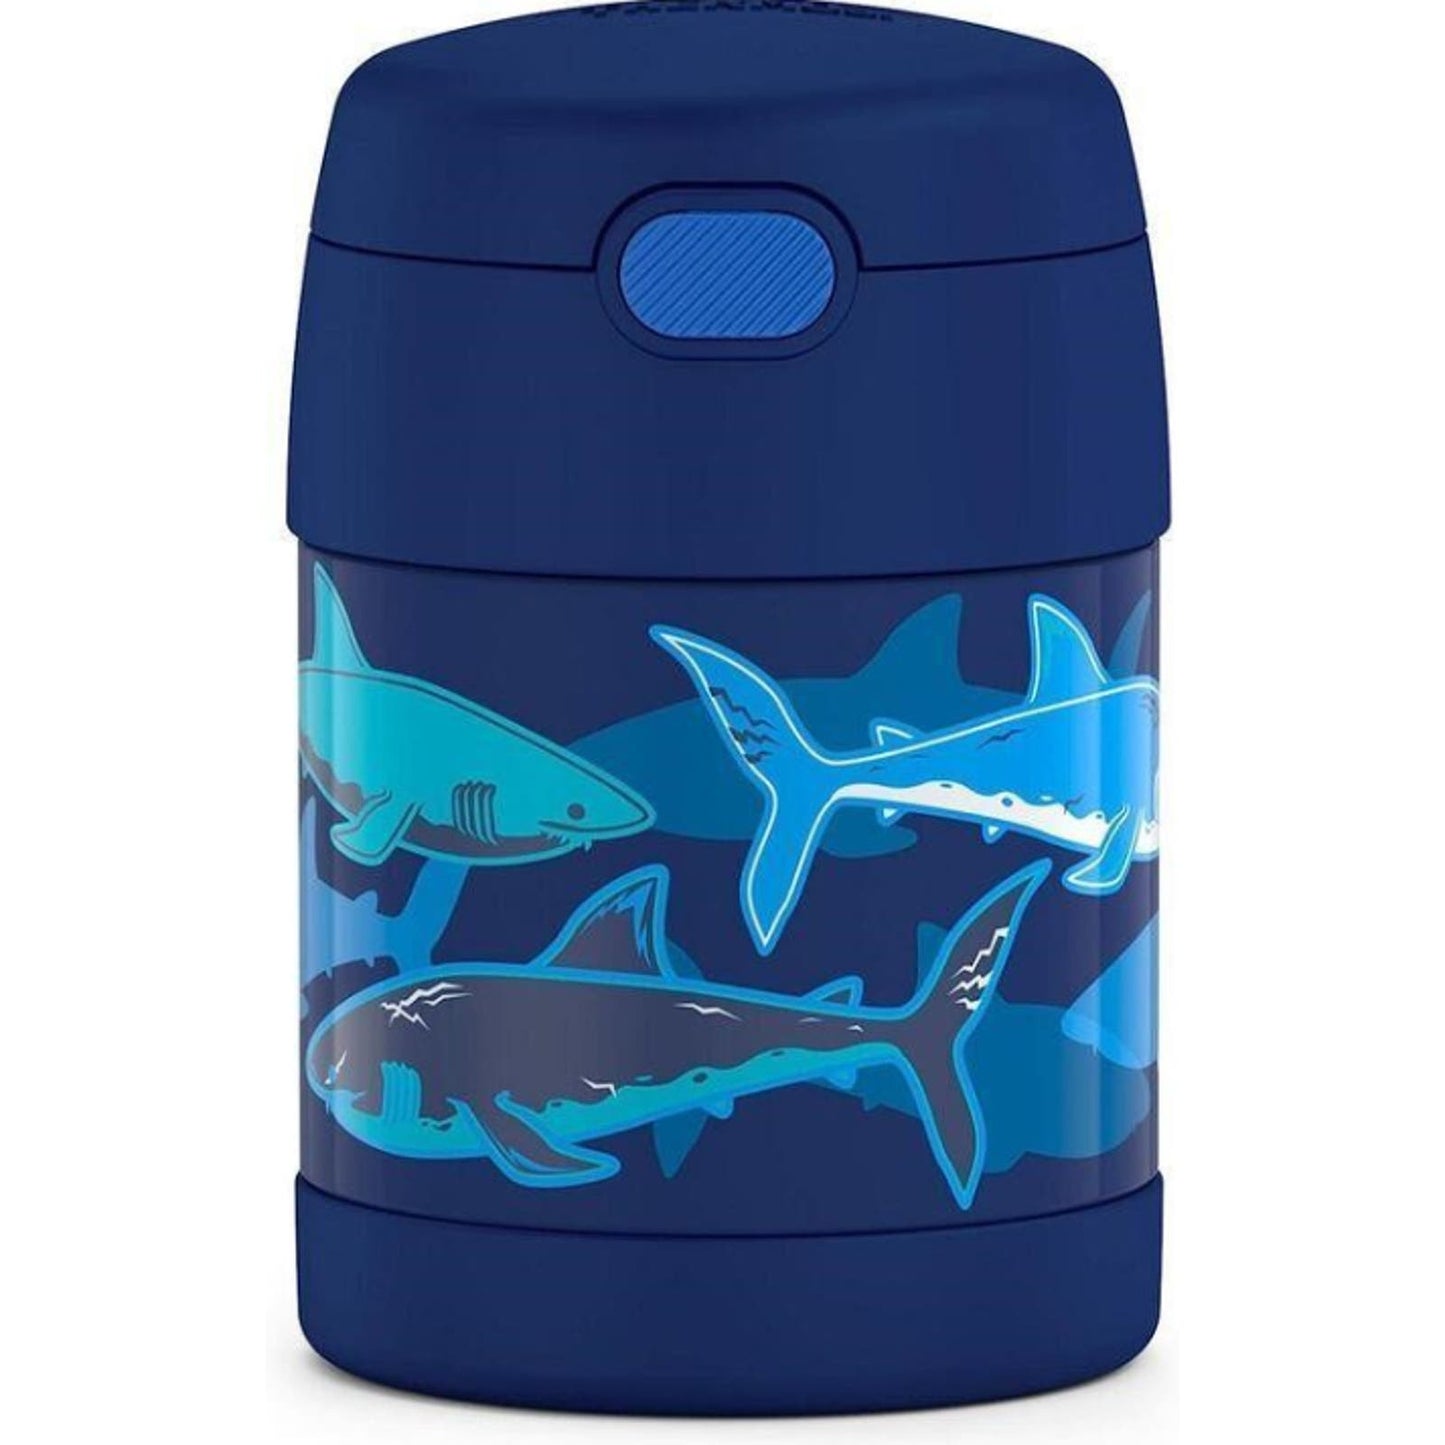 Thermos Funtainer 10 Oz. Vacuum Insulated Kids Food Jar With Spoon - Shark